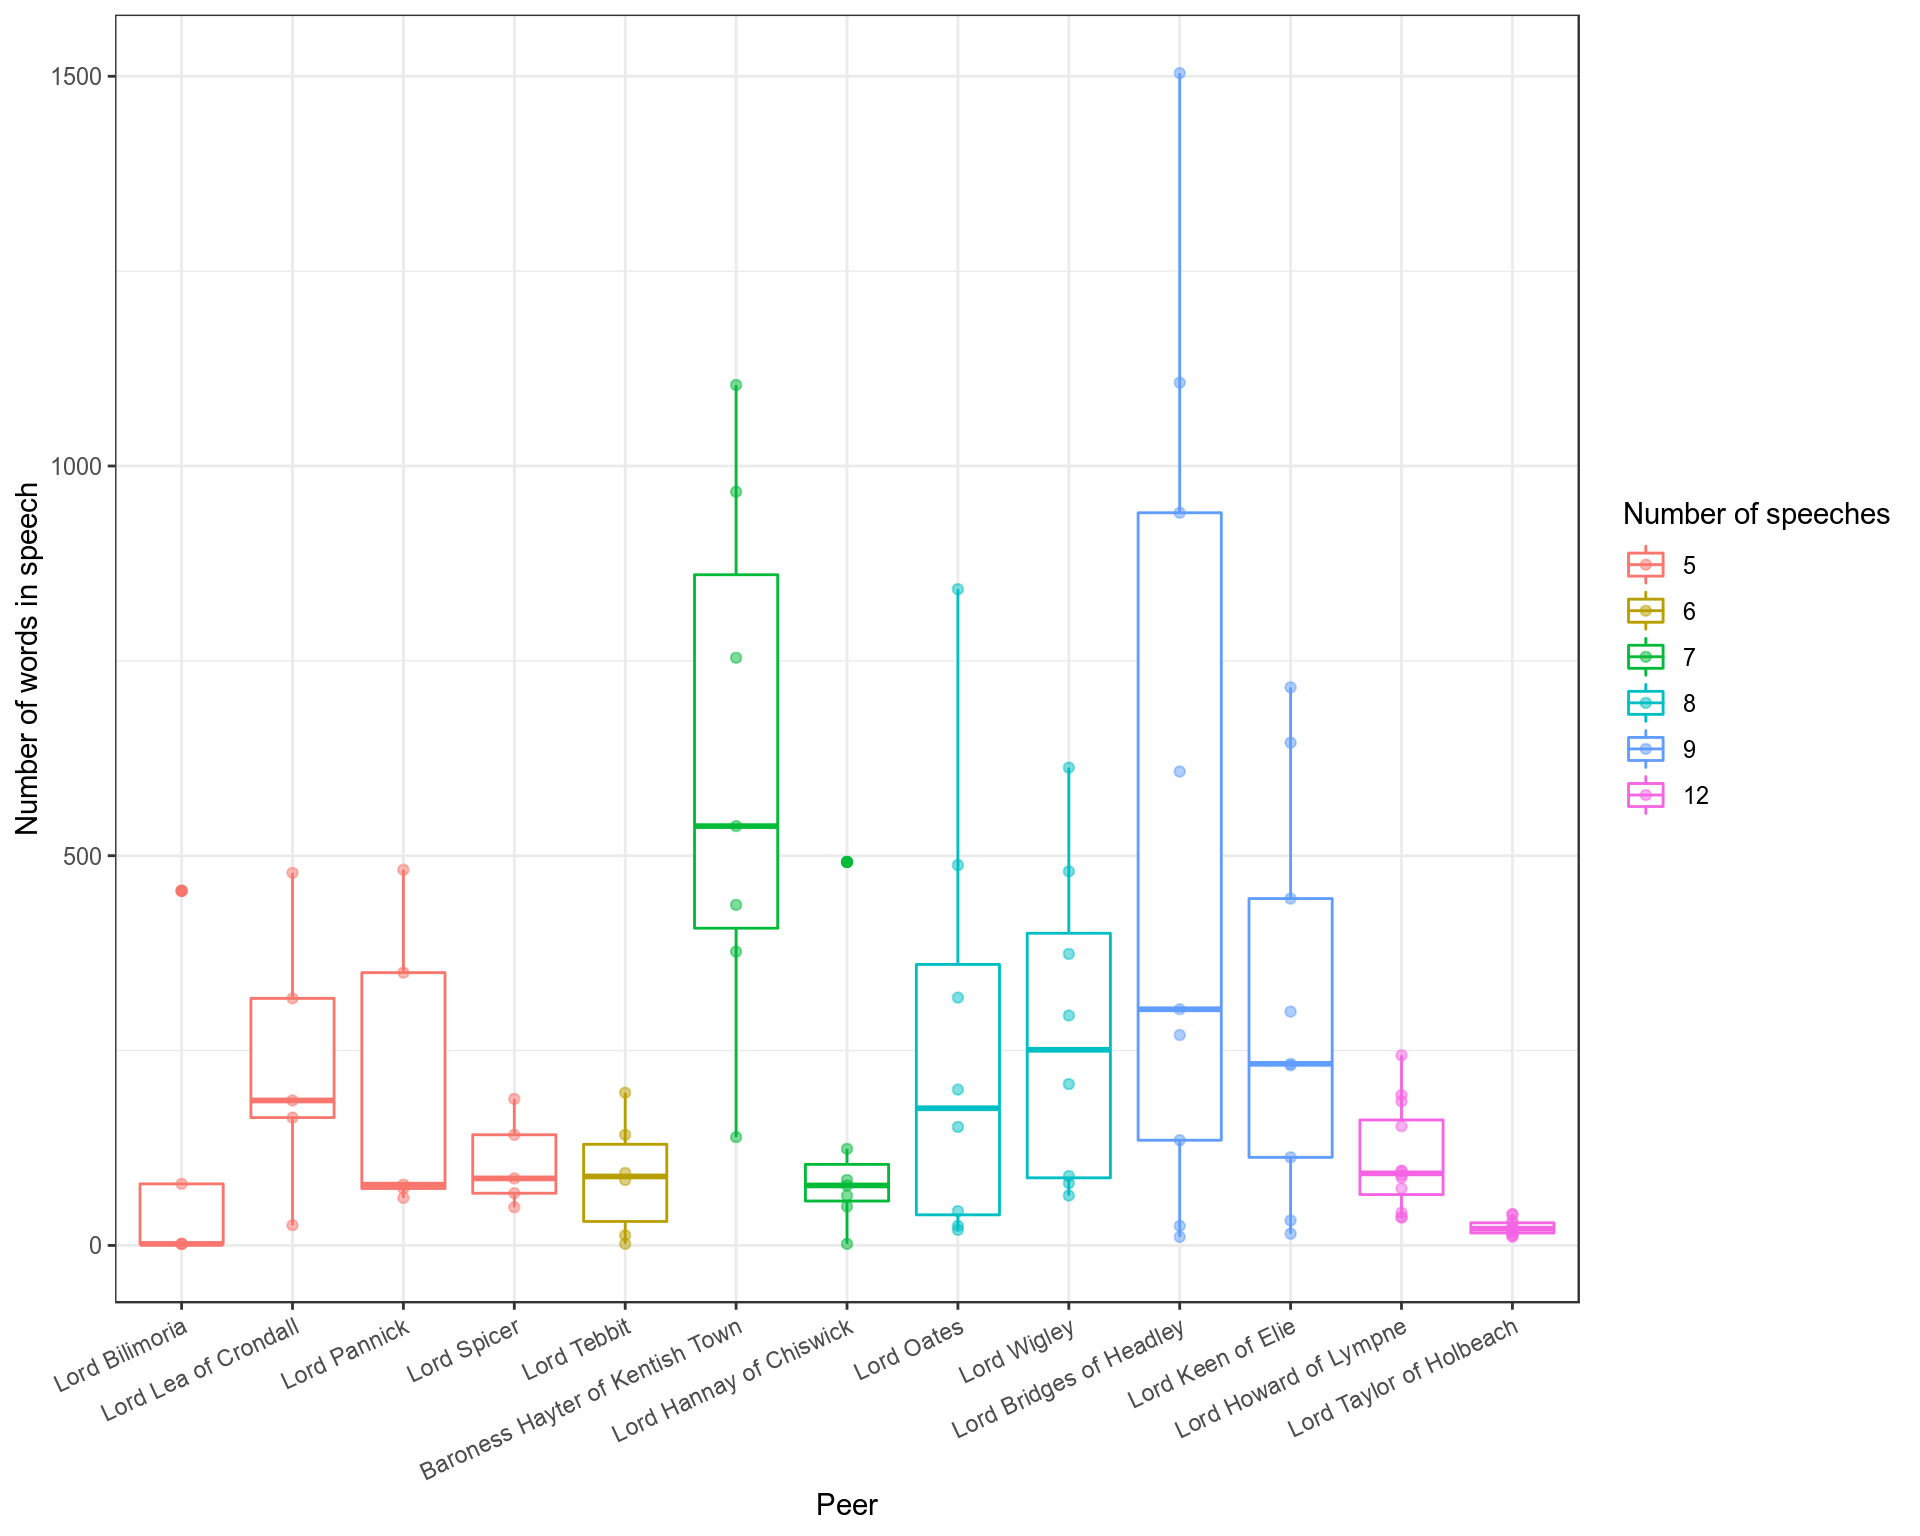 As above but with specific boxplots for each peer.